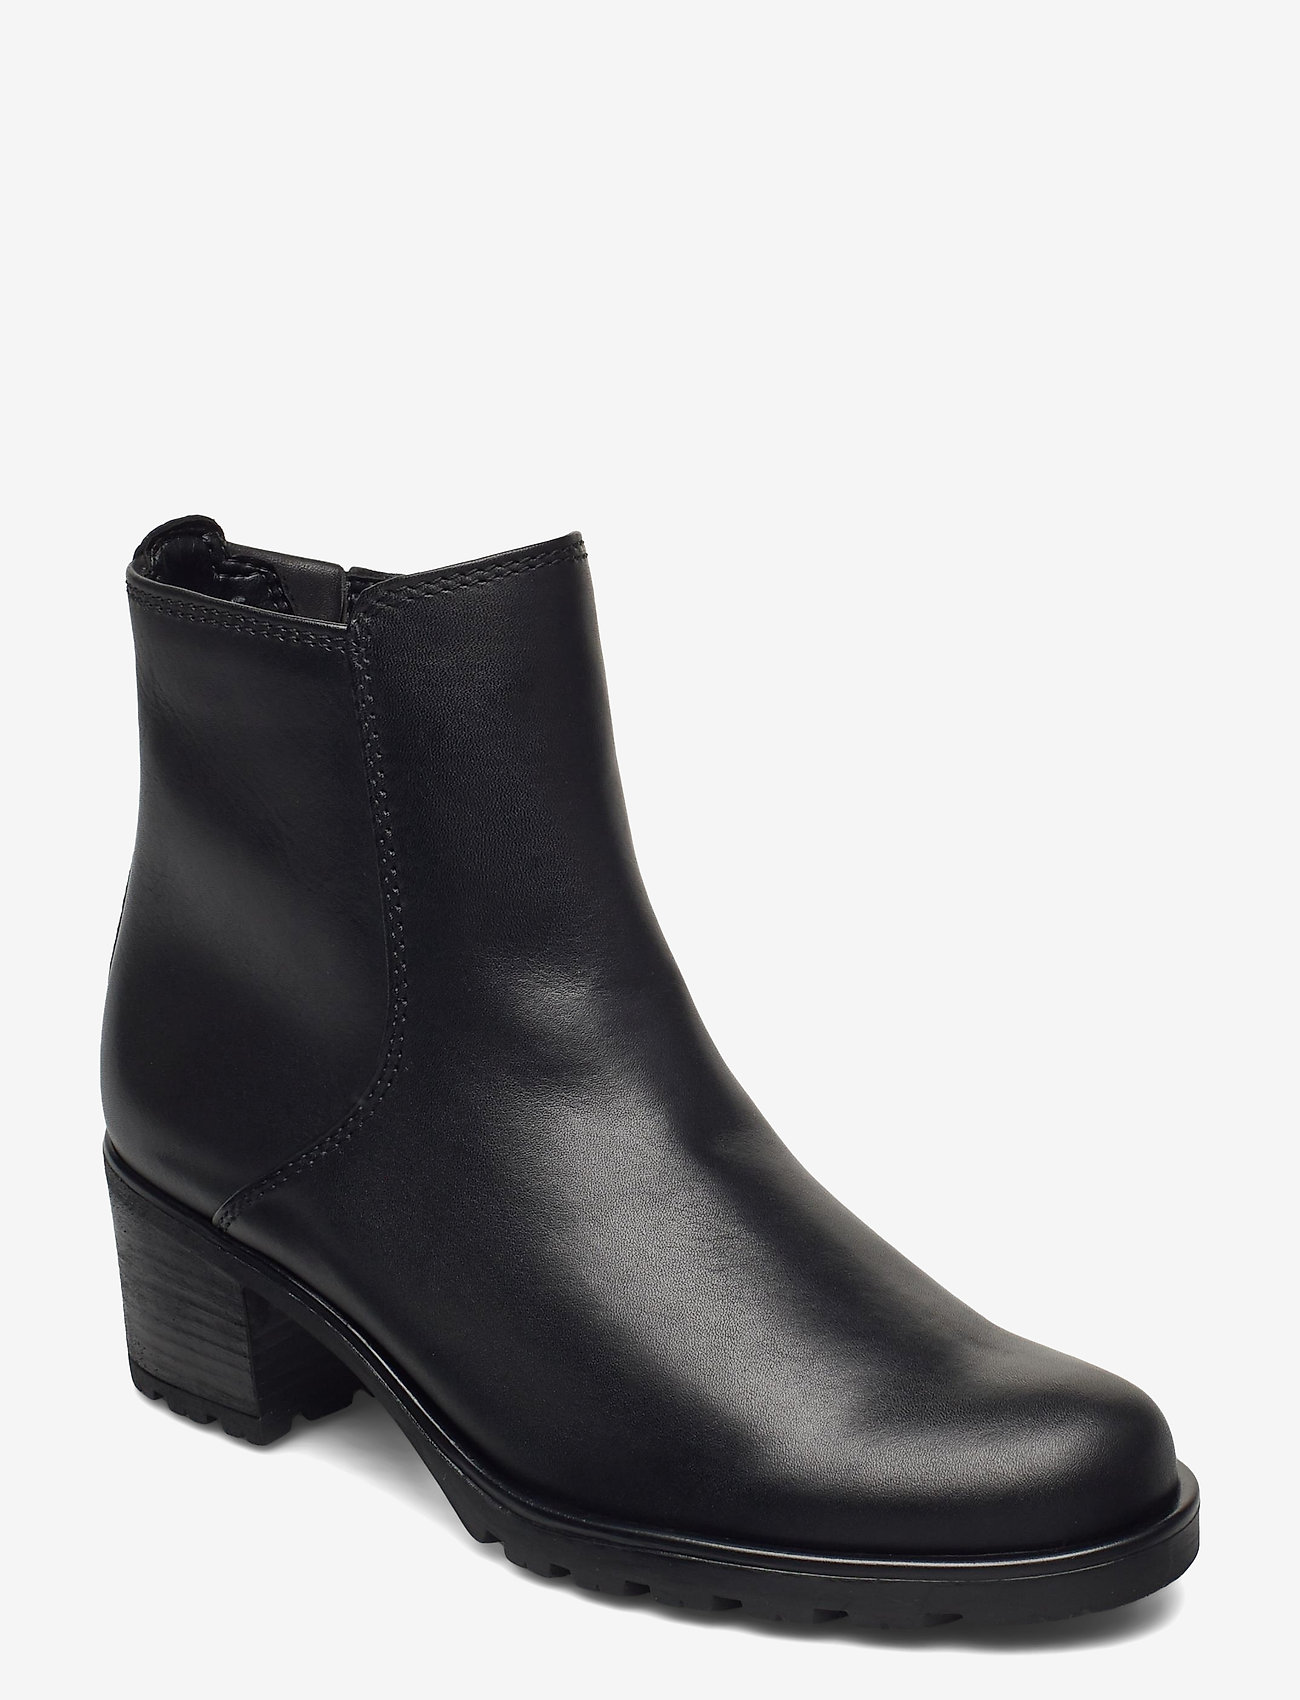 Gabor Ankle Boot - Heeled ankle boots | Boozt.com